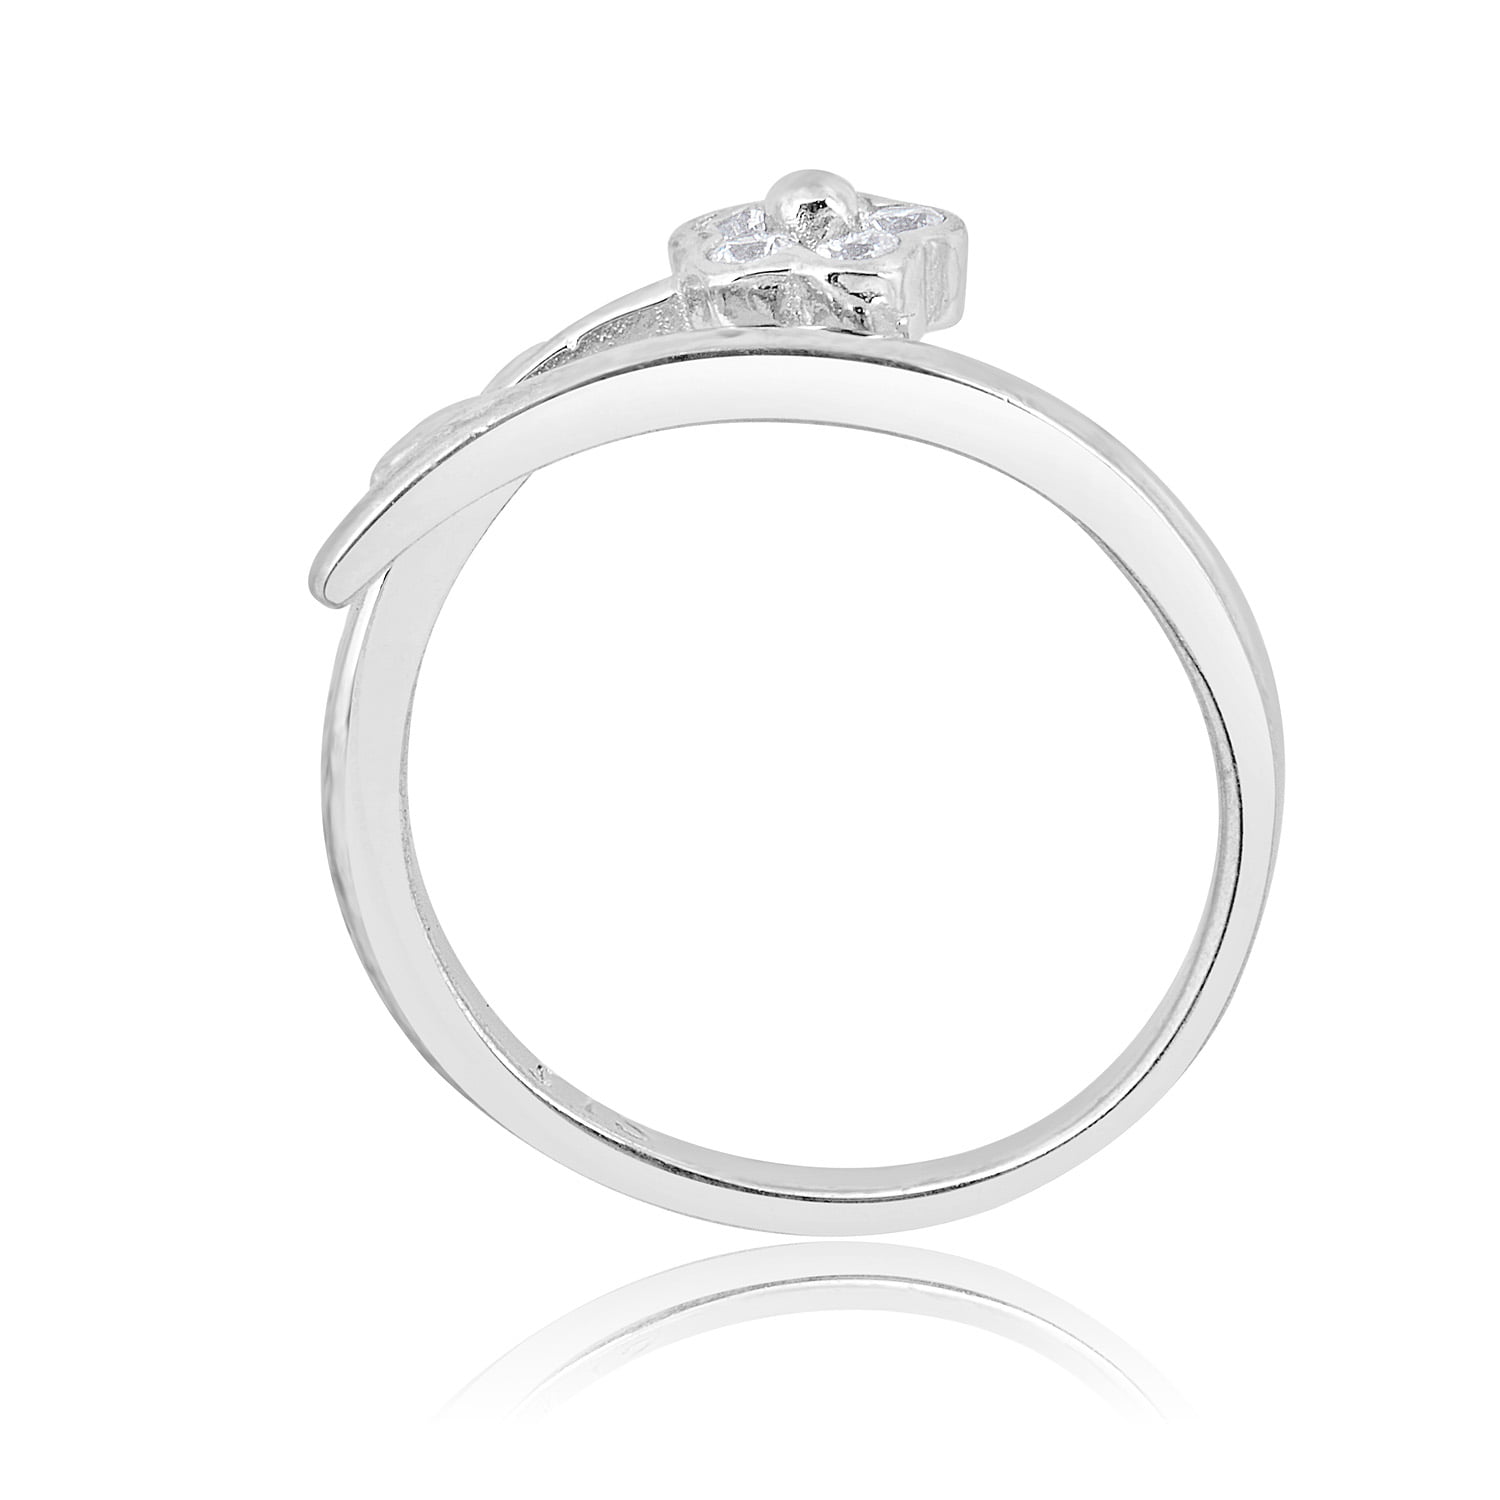 TVS-JEWELS 925 Sterling Silver Adjustable Bypass Womens Toe Ring With White CZ